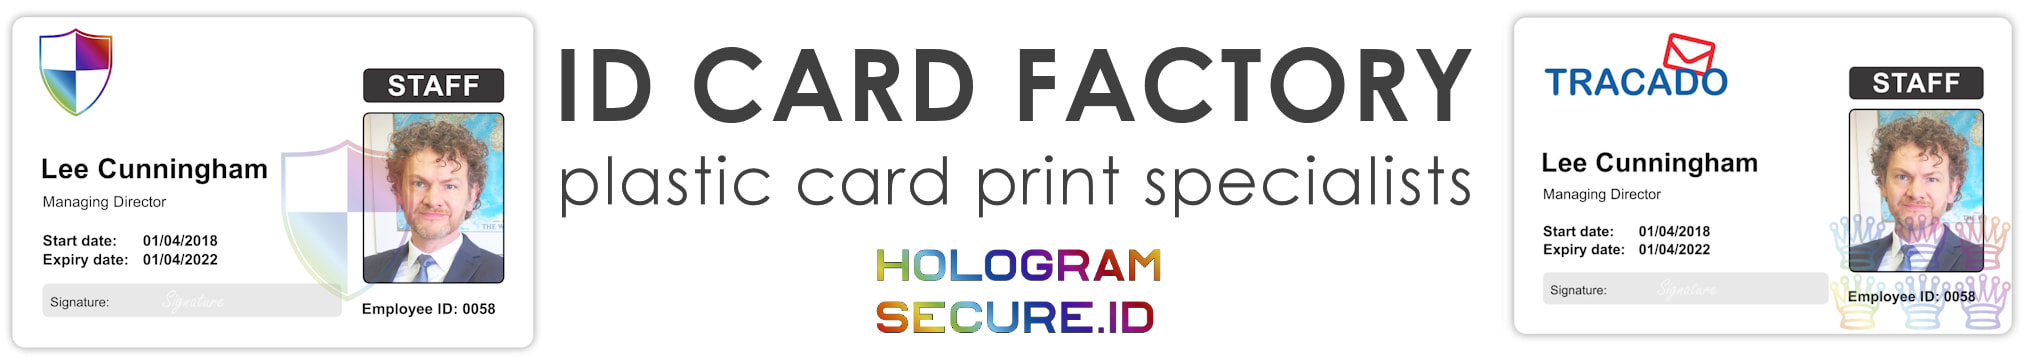 Newcastle holographic ID cards | examples of staff photo ID cards | samples of employee Identity card printing | Workers ID cards printed with hologram